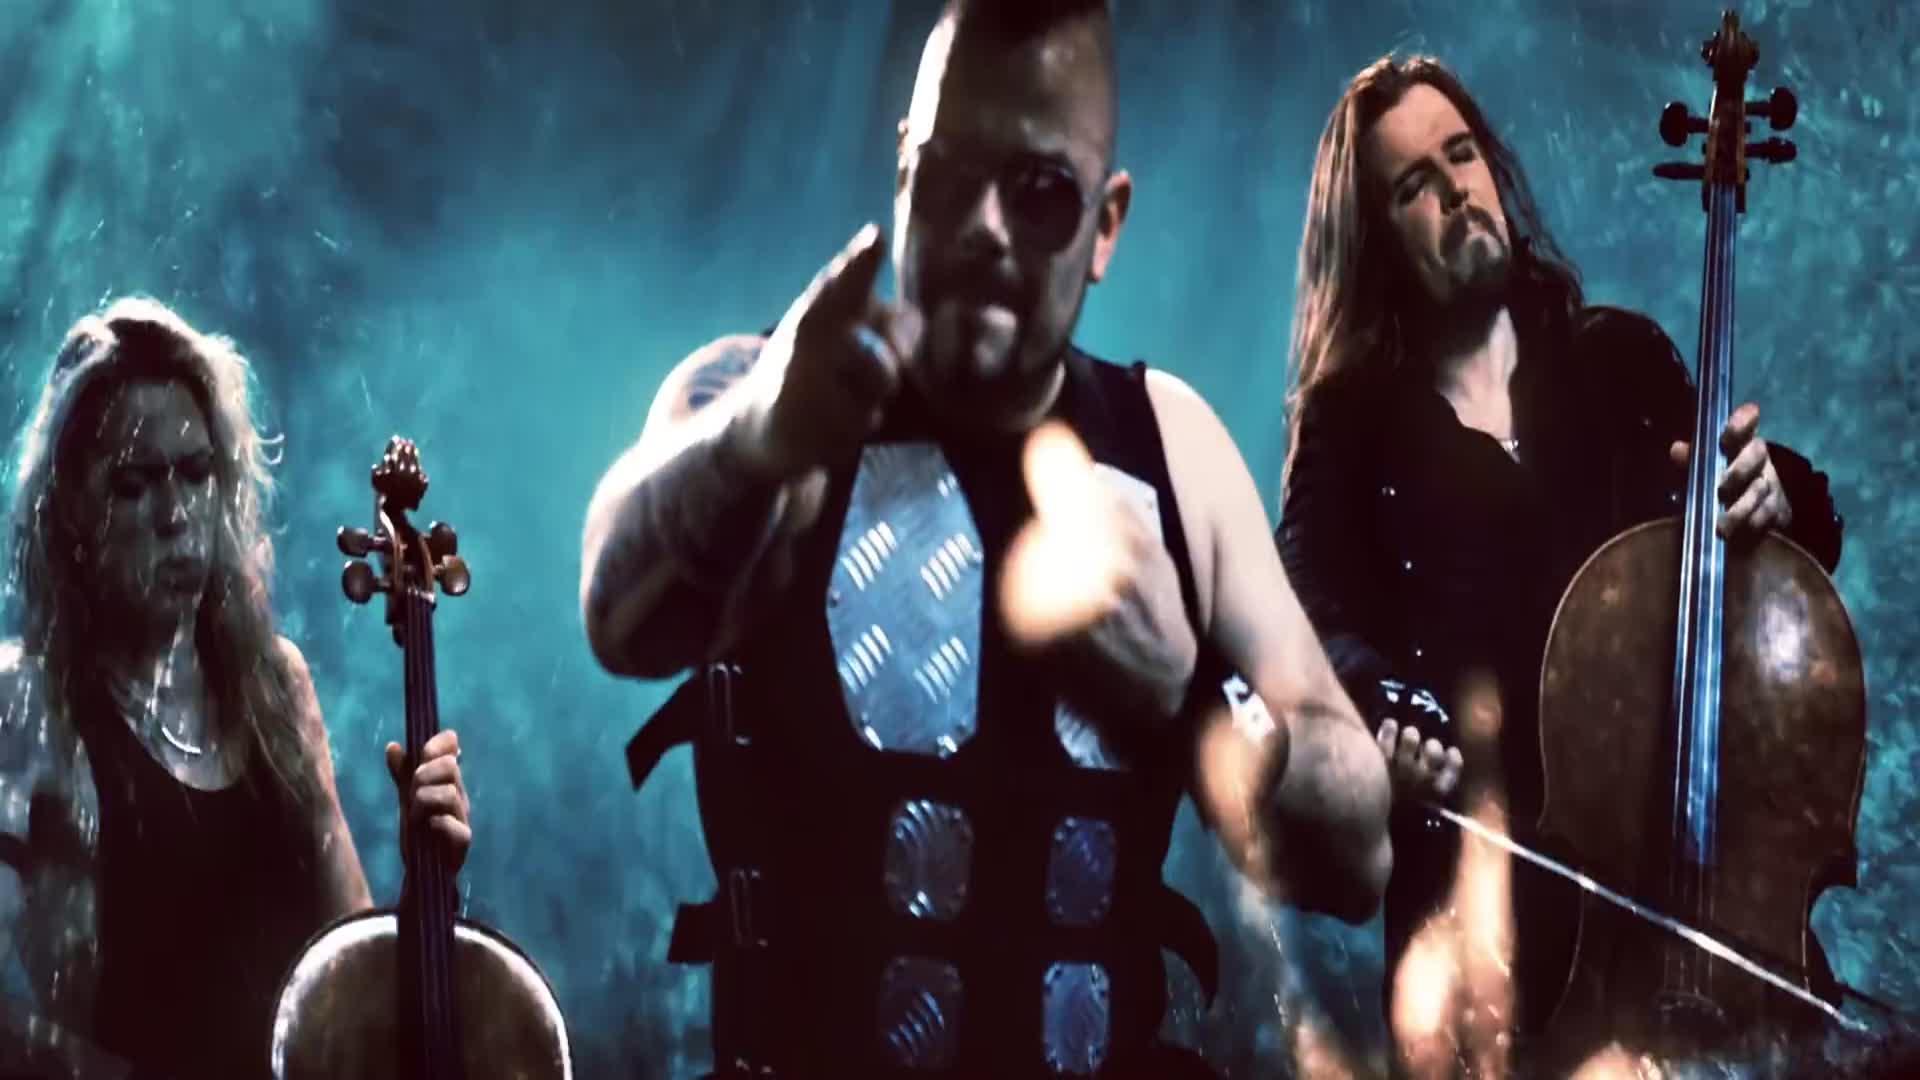 Apocalyptica Ft. Joakim Broden - Live Or Die